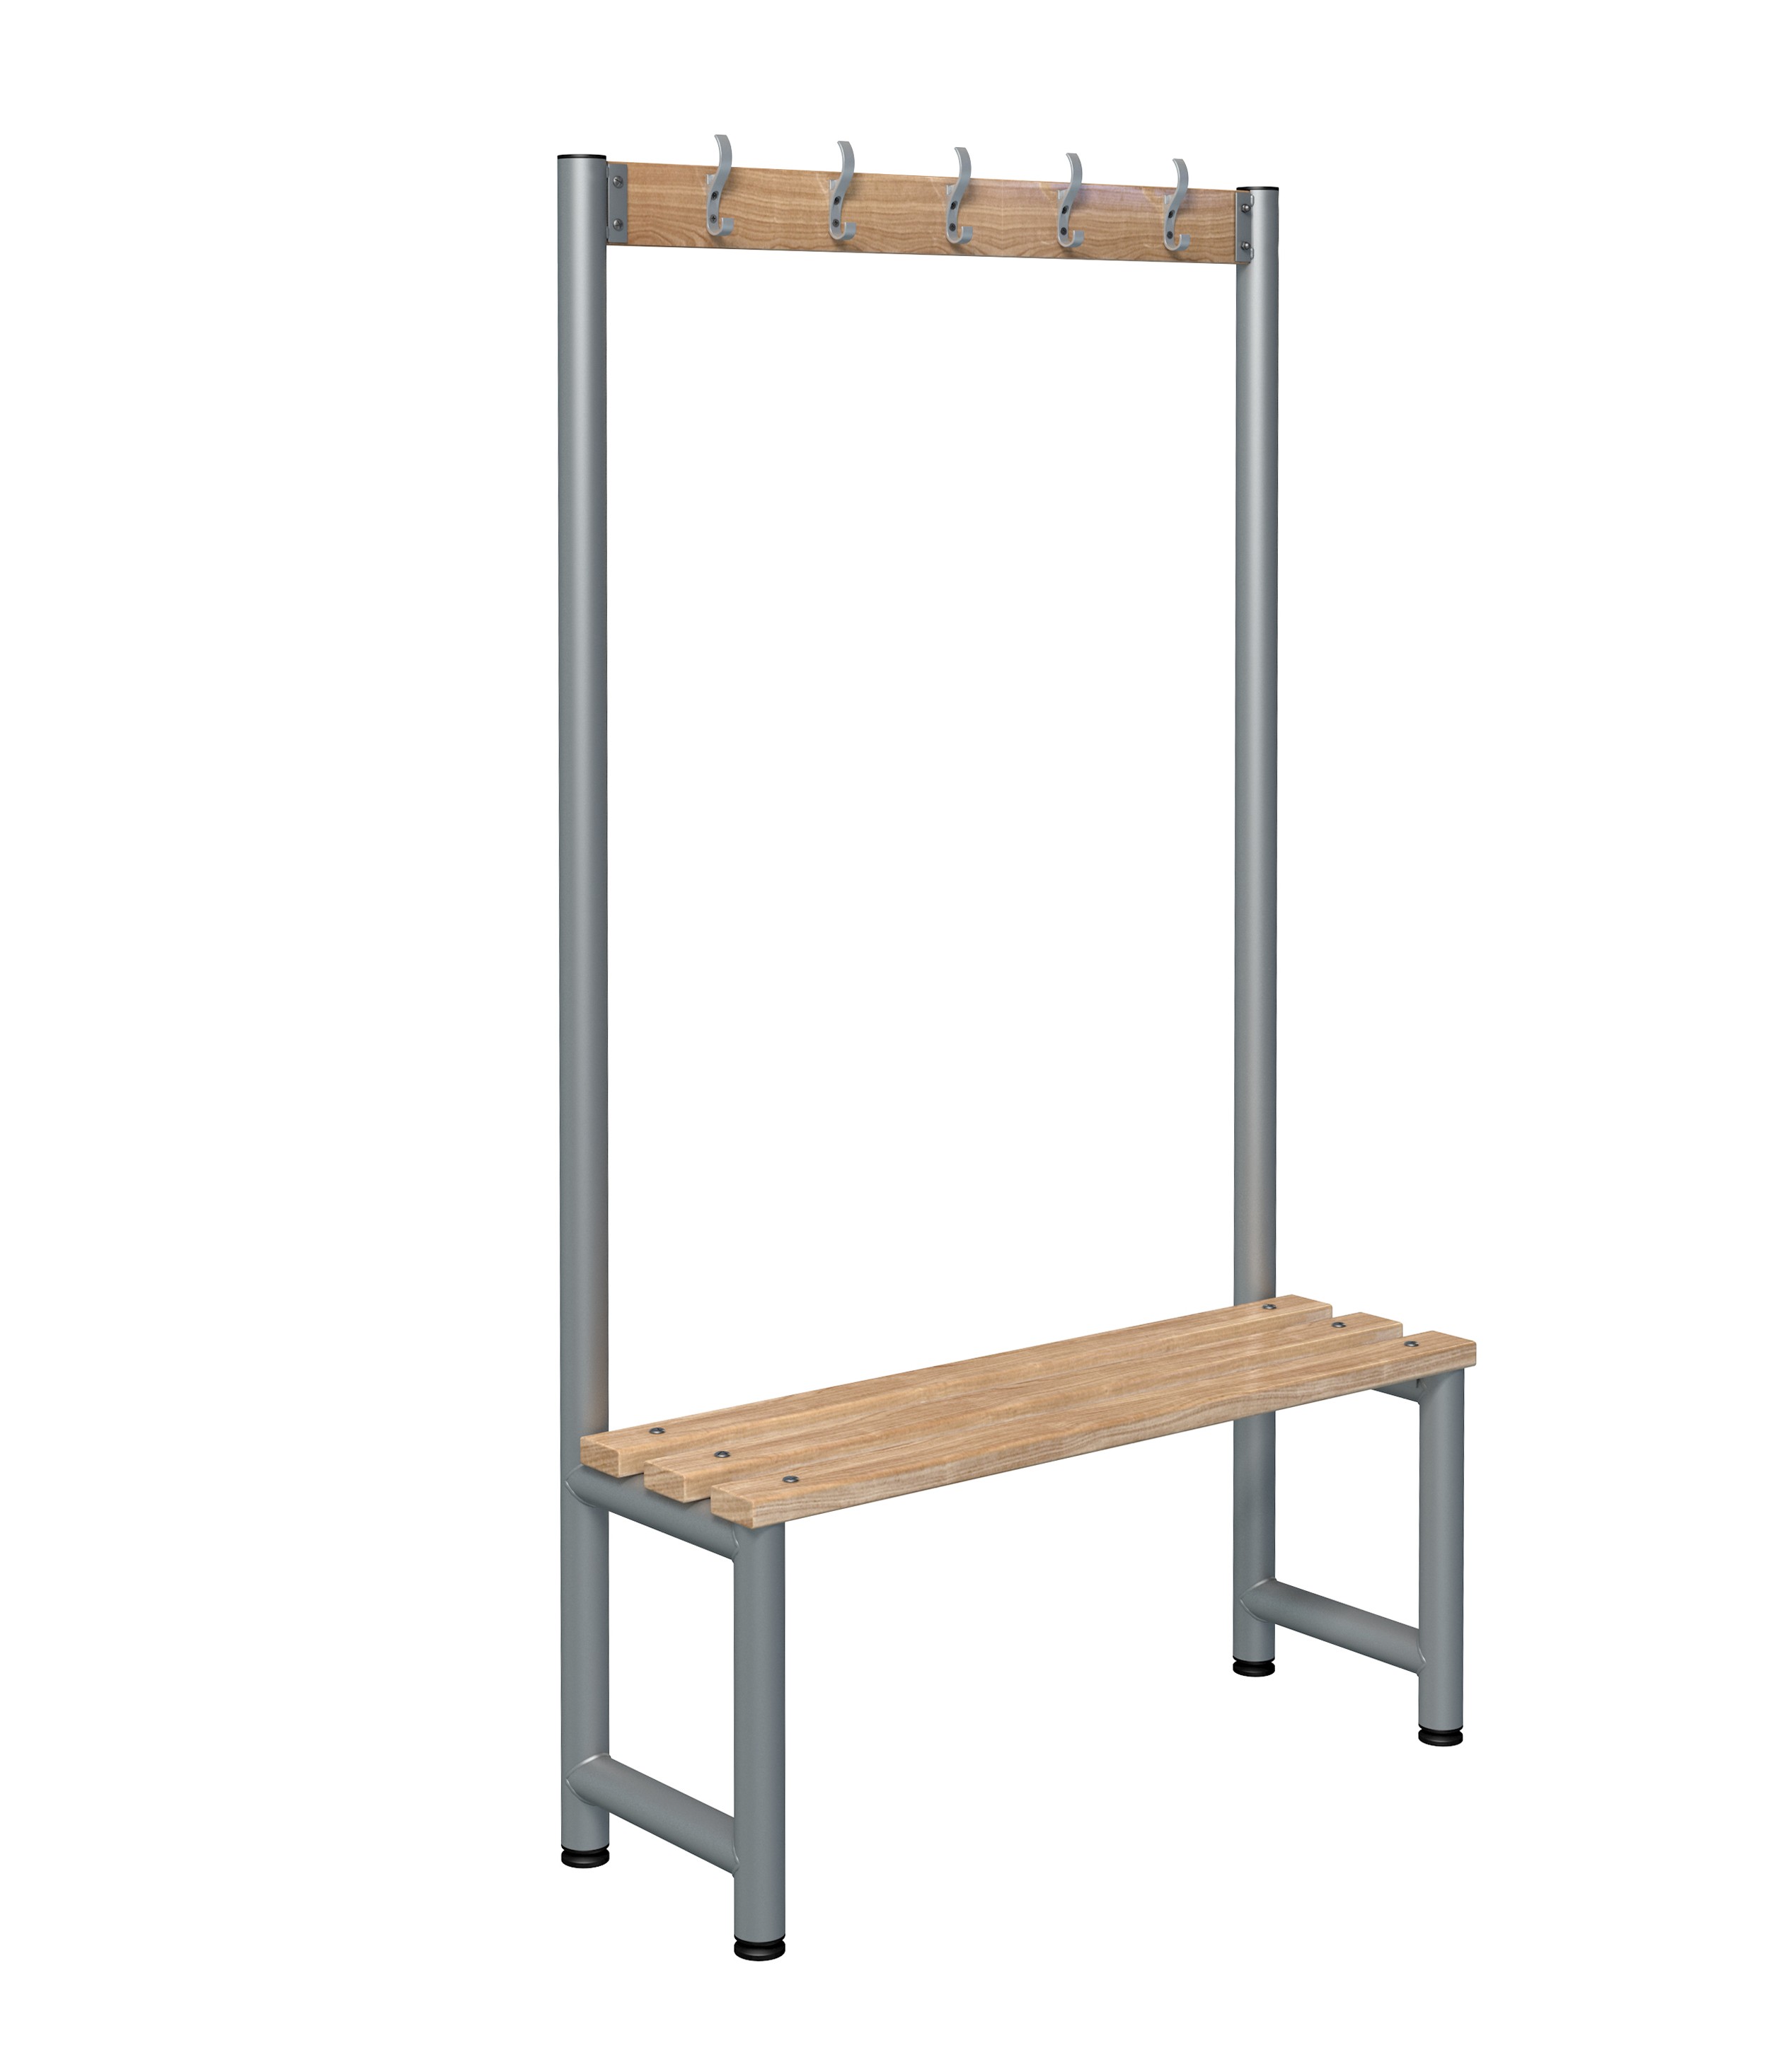 Single Sided Hook Bench Type D - Infant